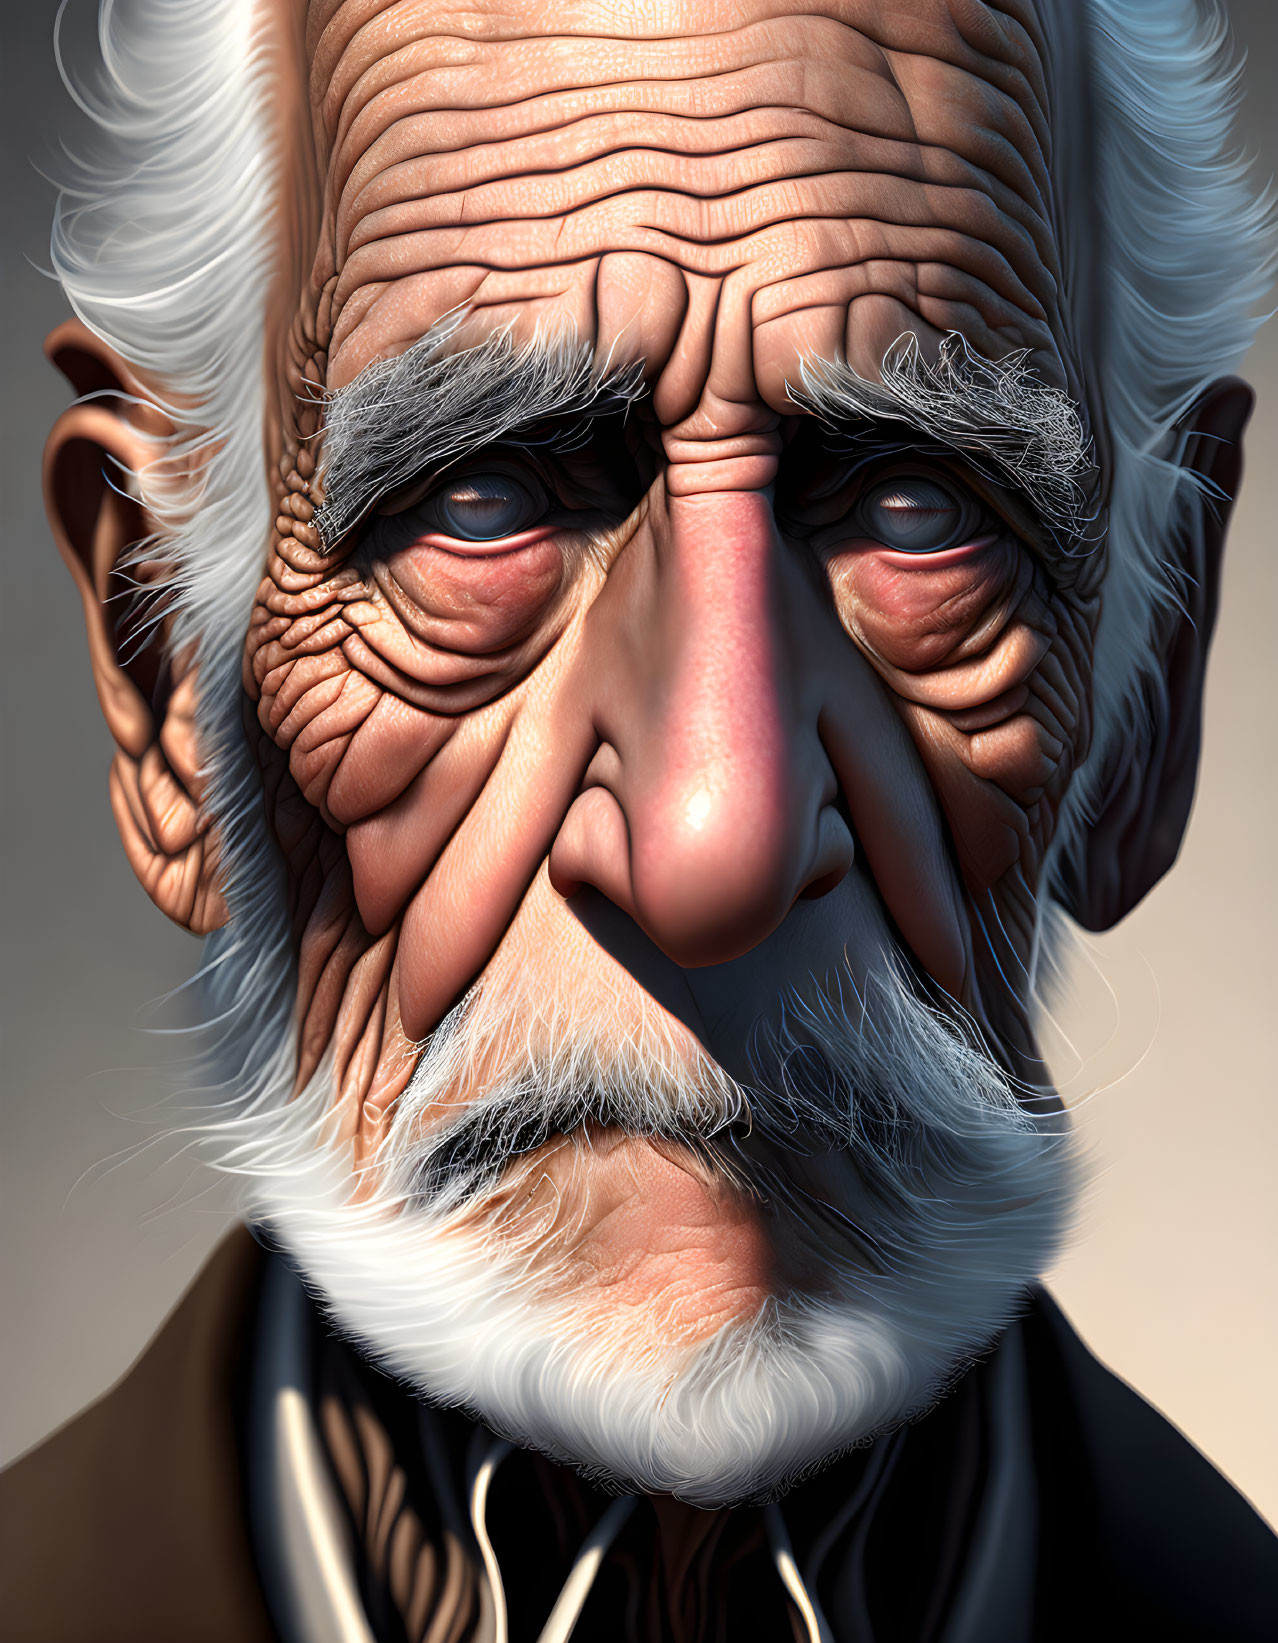 Elderly man with deep wrinkles and white beard gazes solemnly